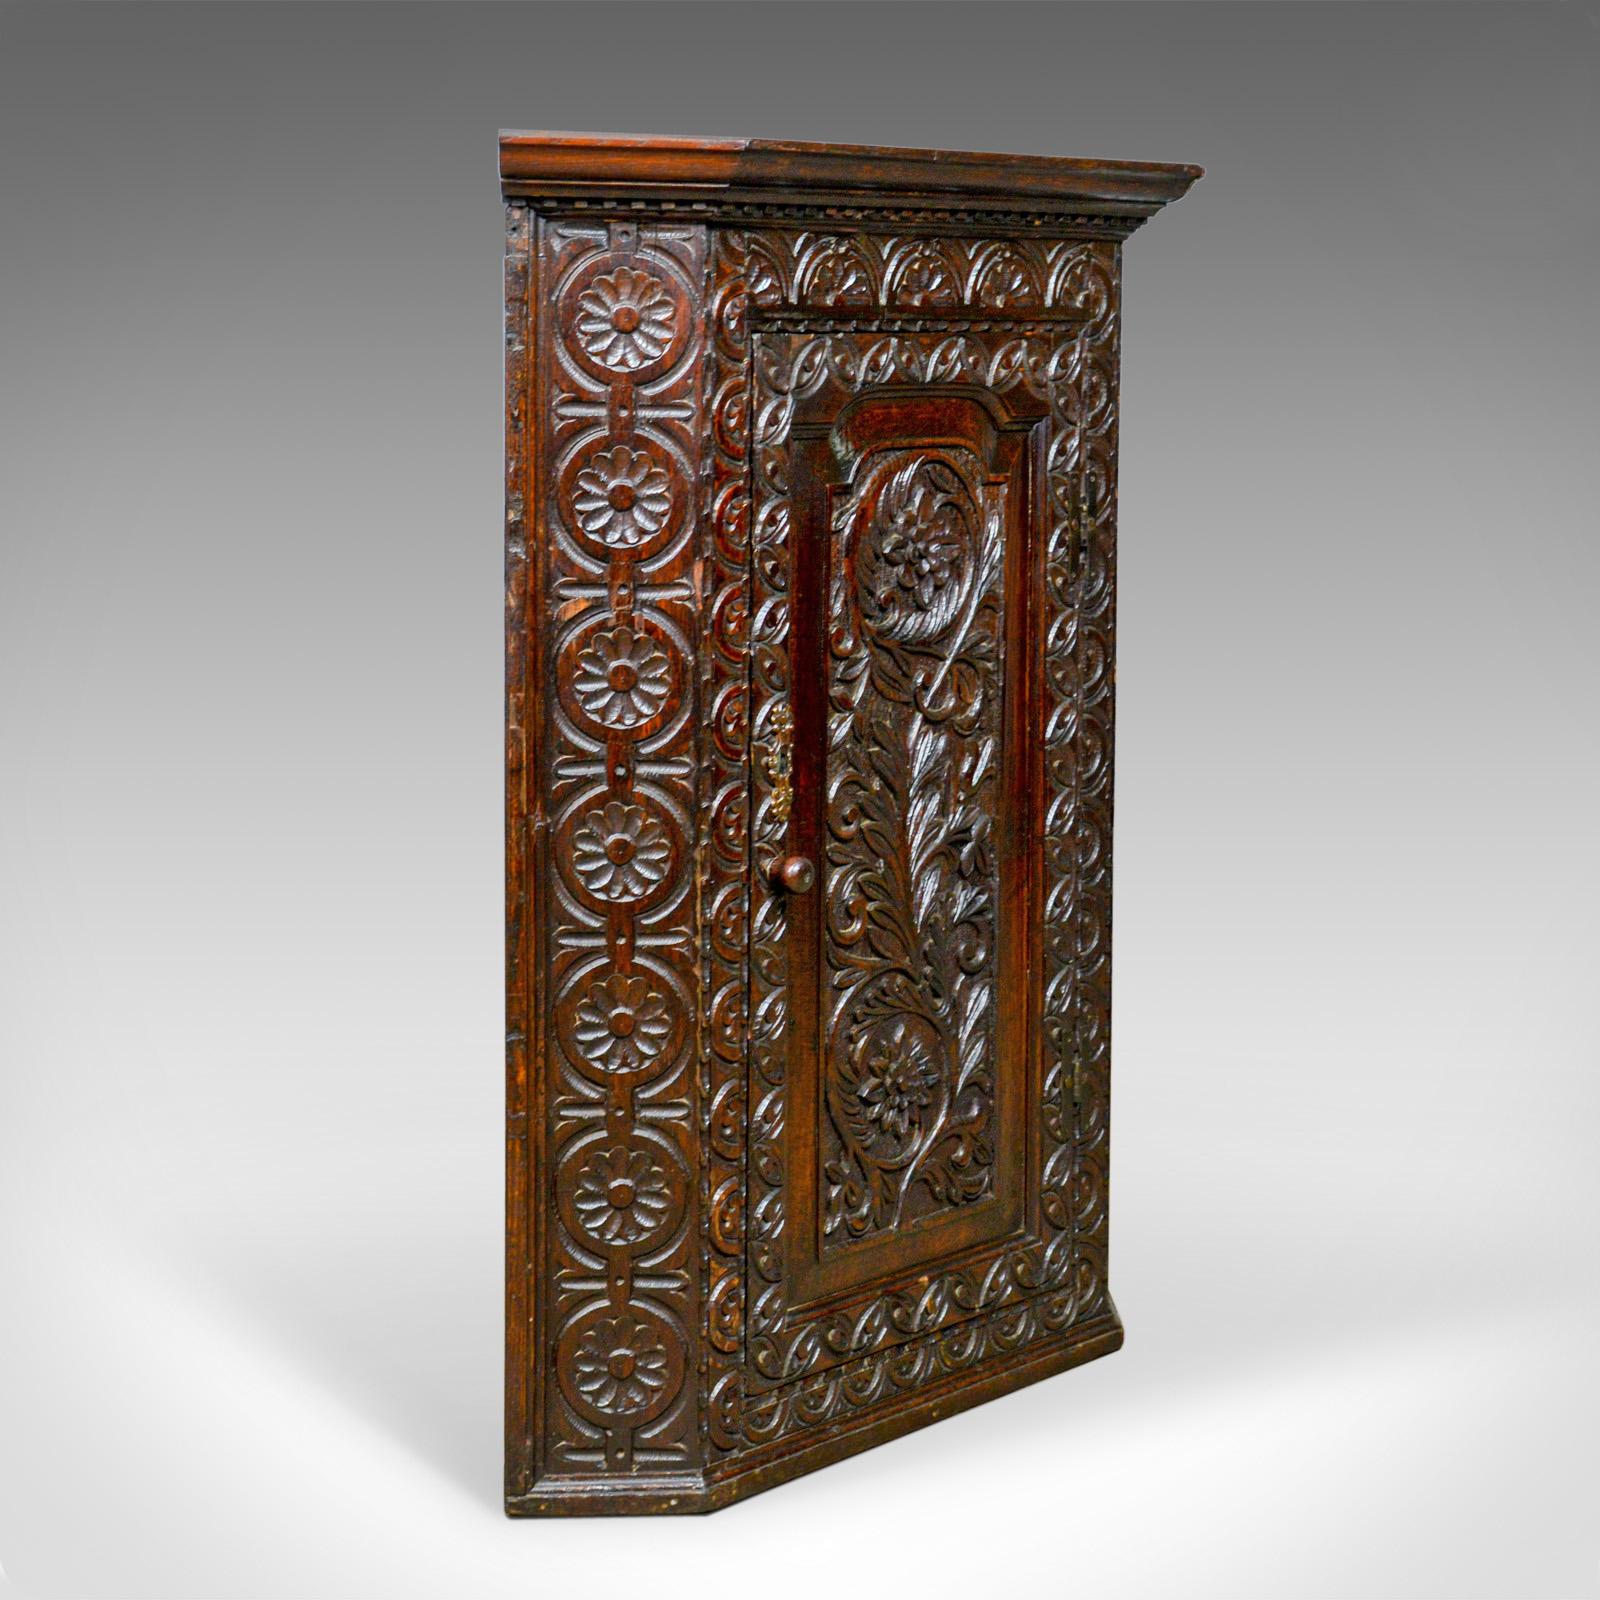 This is an antique corner cabinet. An English, Georgian, carved oak, hanging corner cupboard dating to the mid-18th century, circa 1760.

Crafted in English oak with good color
Desirable aged patina with a wax polished finish
Profusely carved